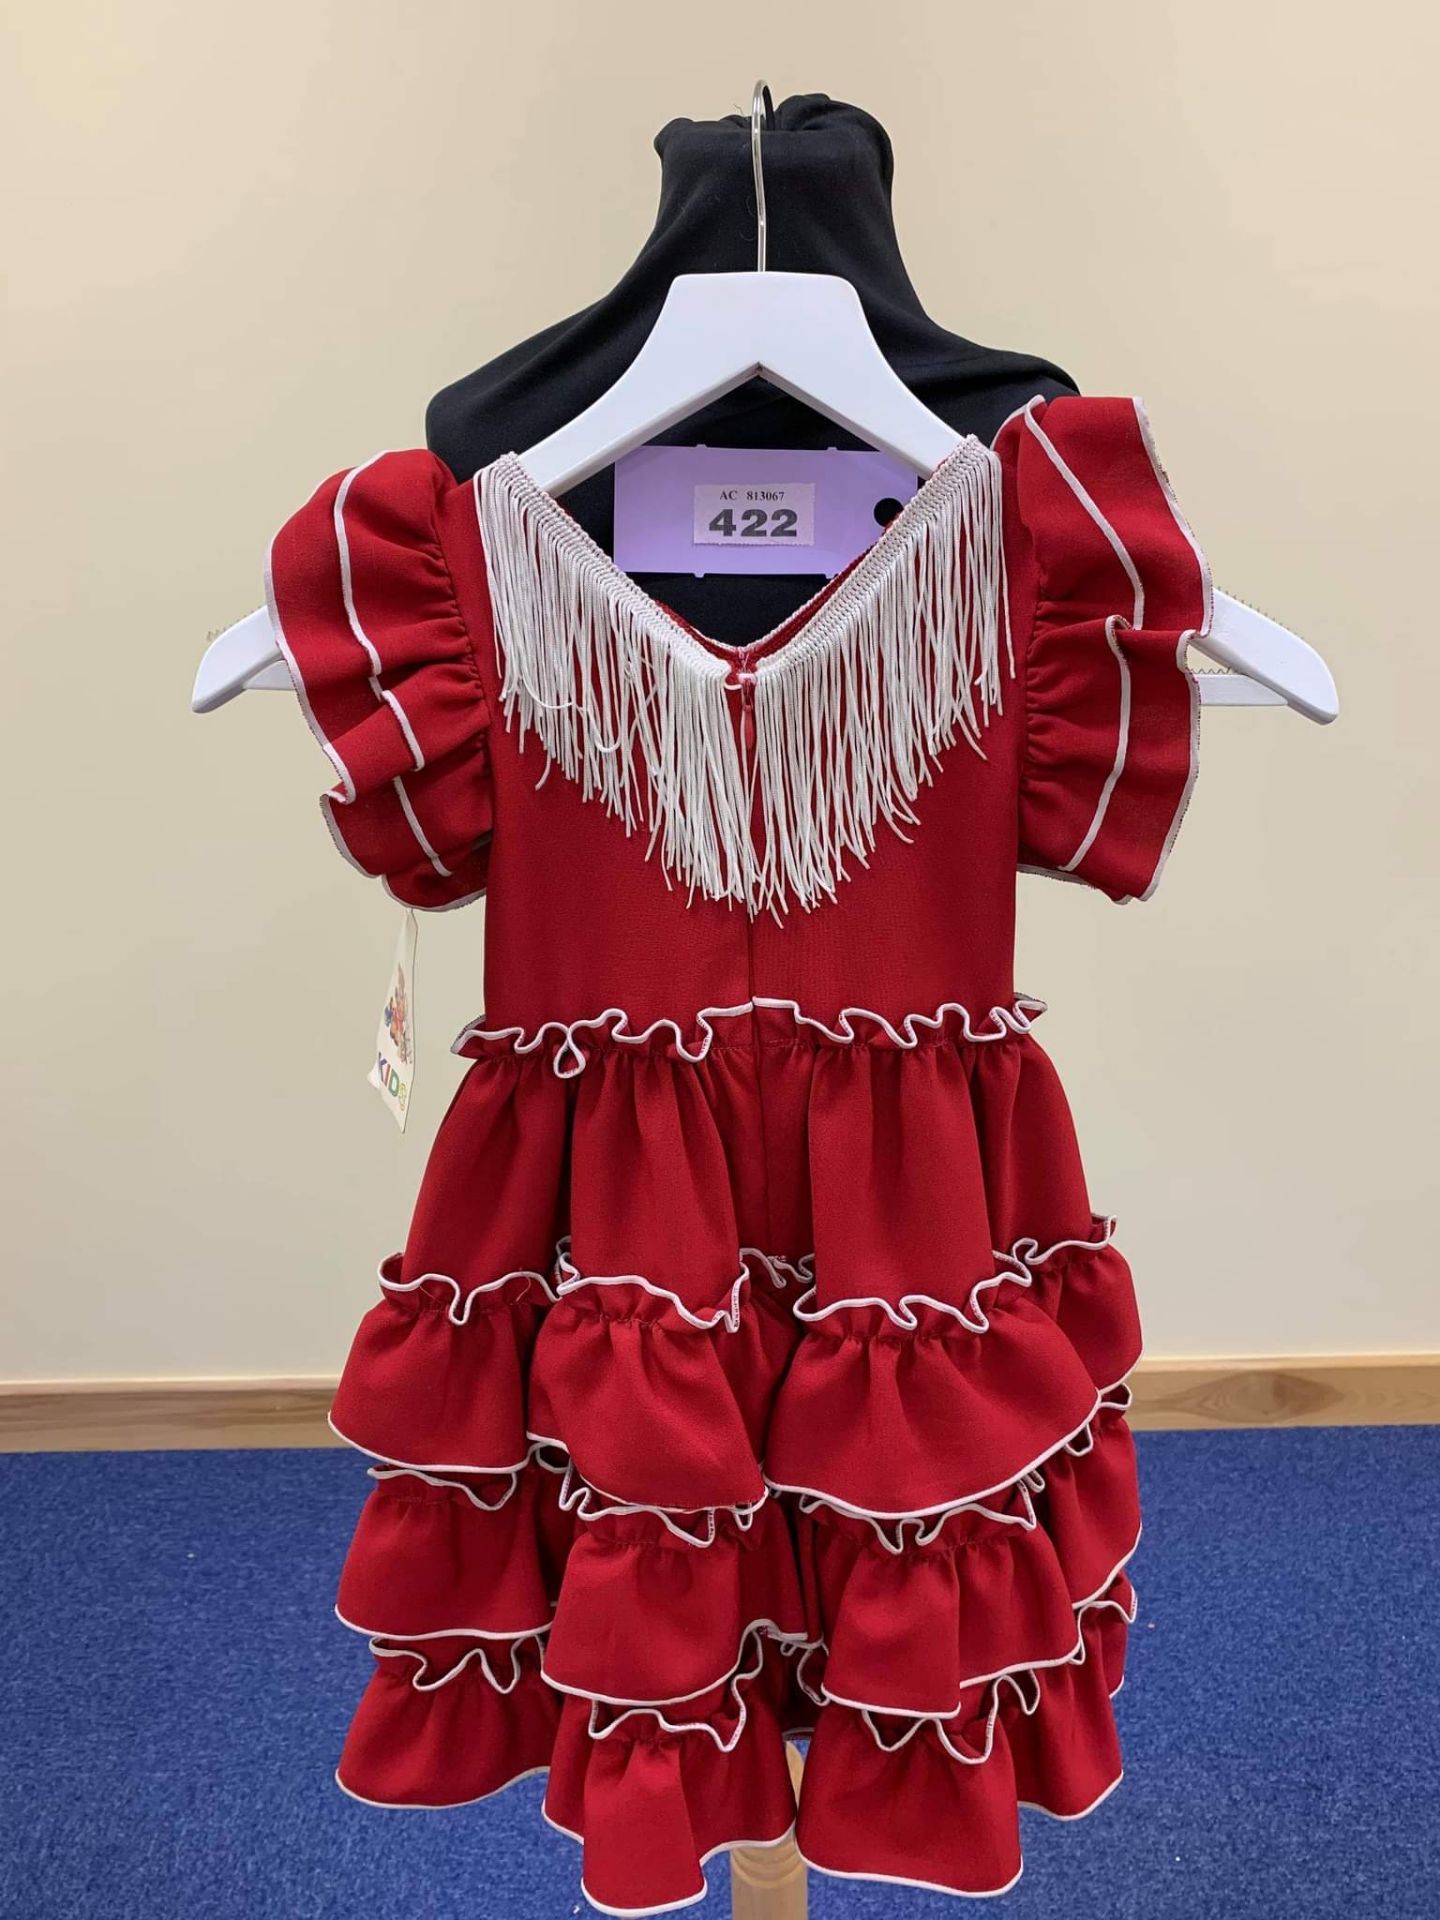 Spanish Dress - Authentic and Vintage - Image 2 of 4